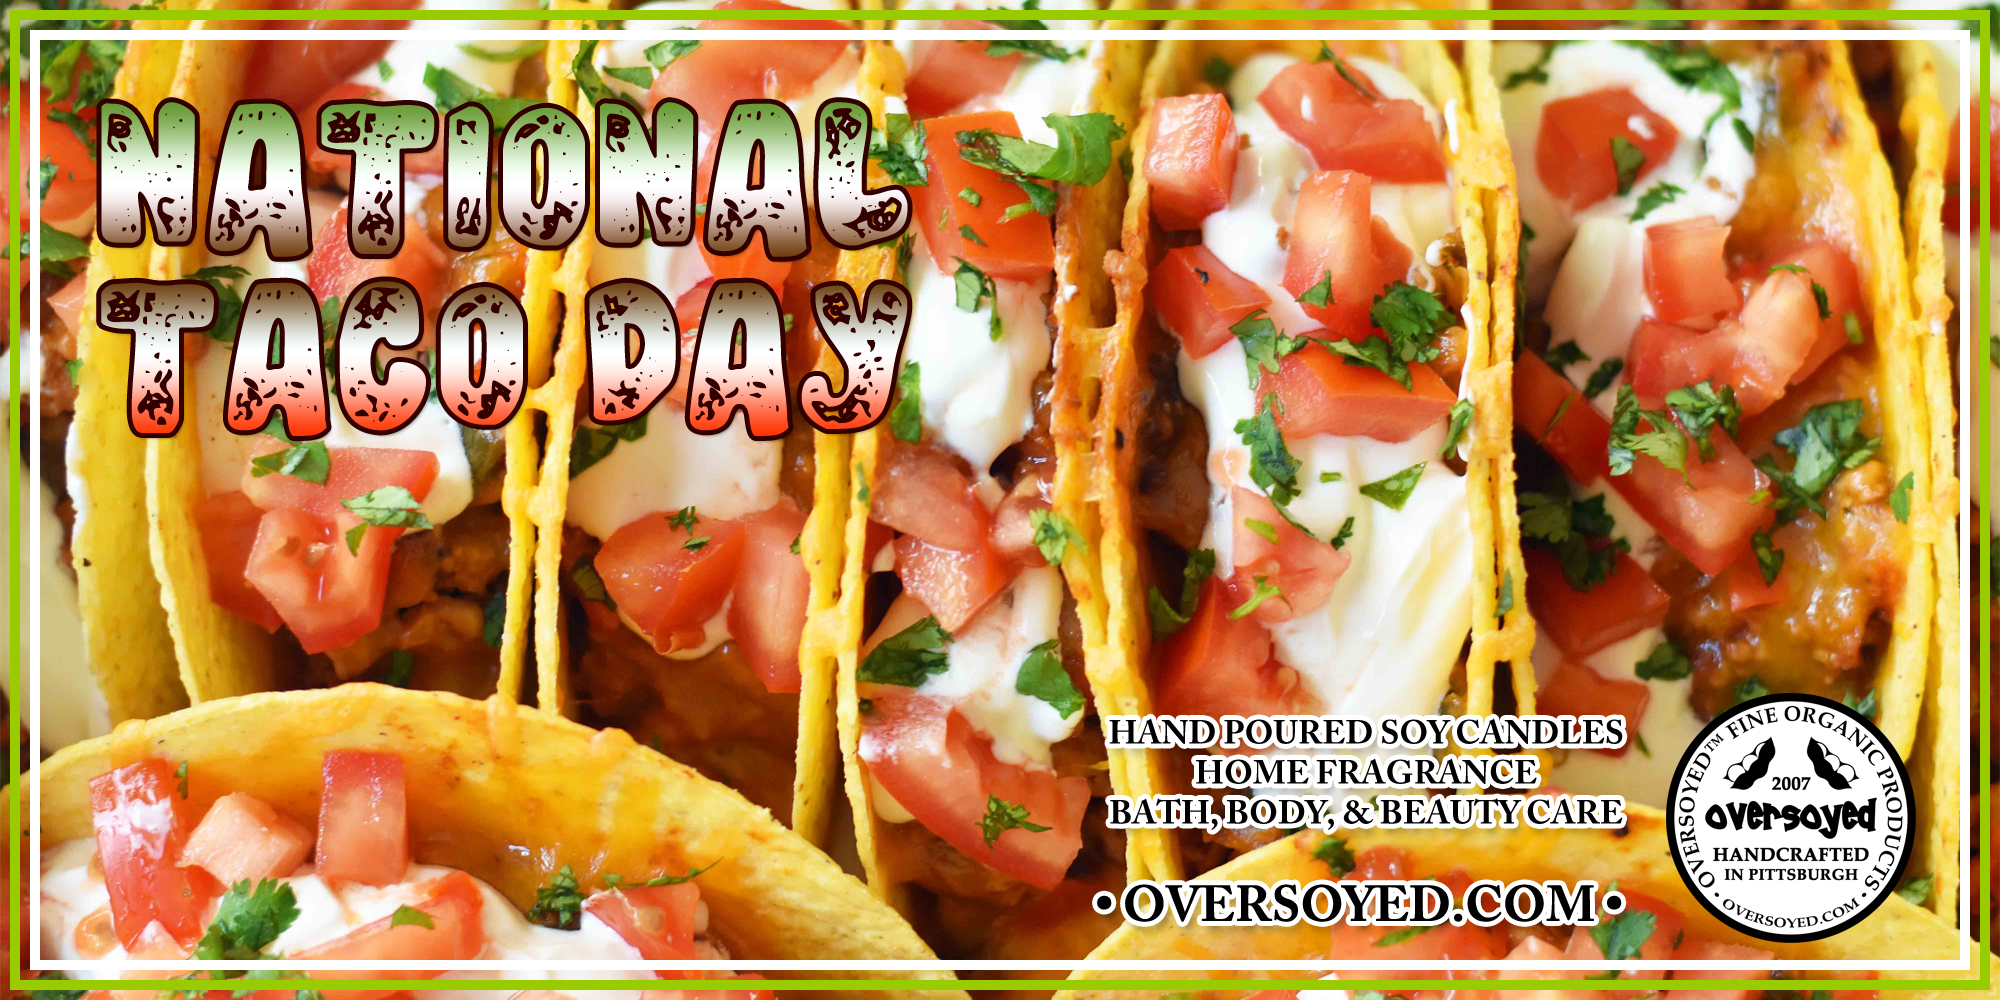 OverSoyed Fine Organic Products - National Taco Day